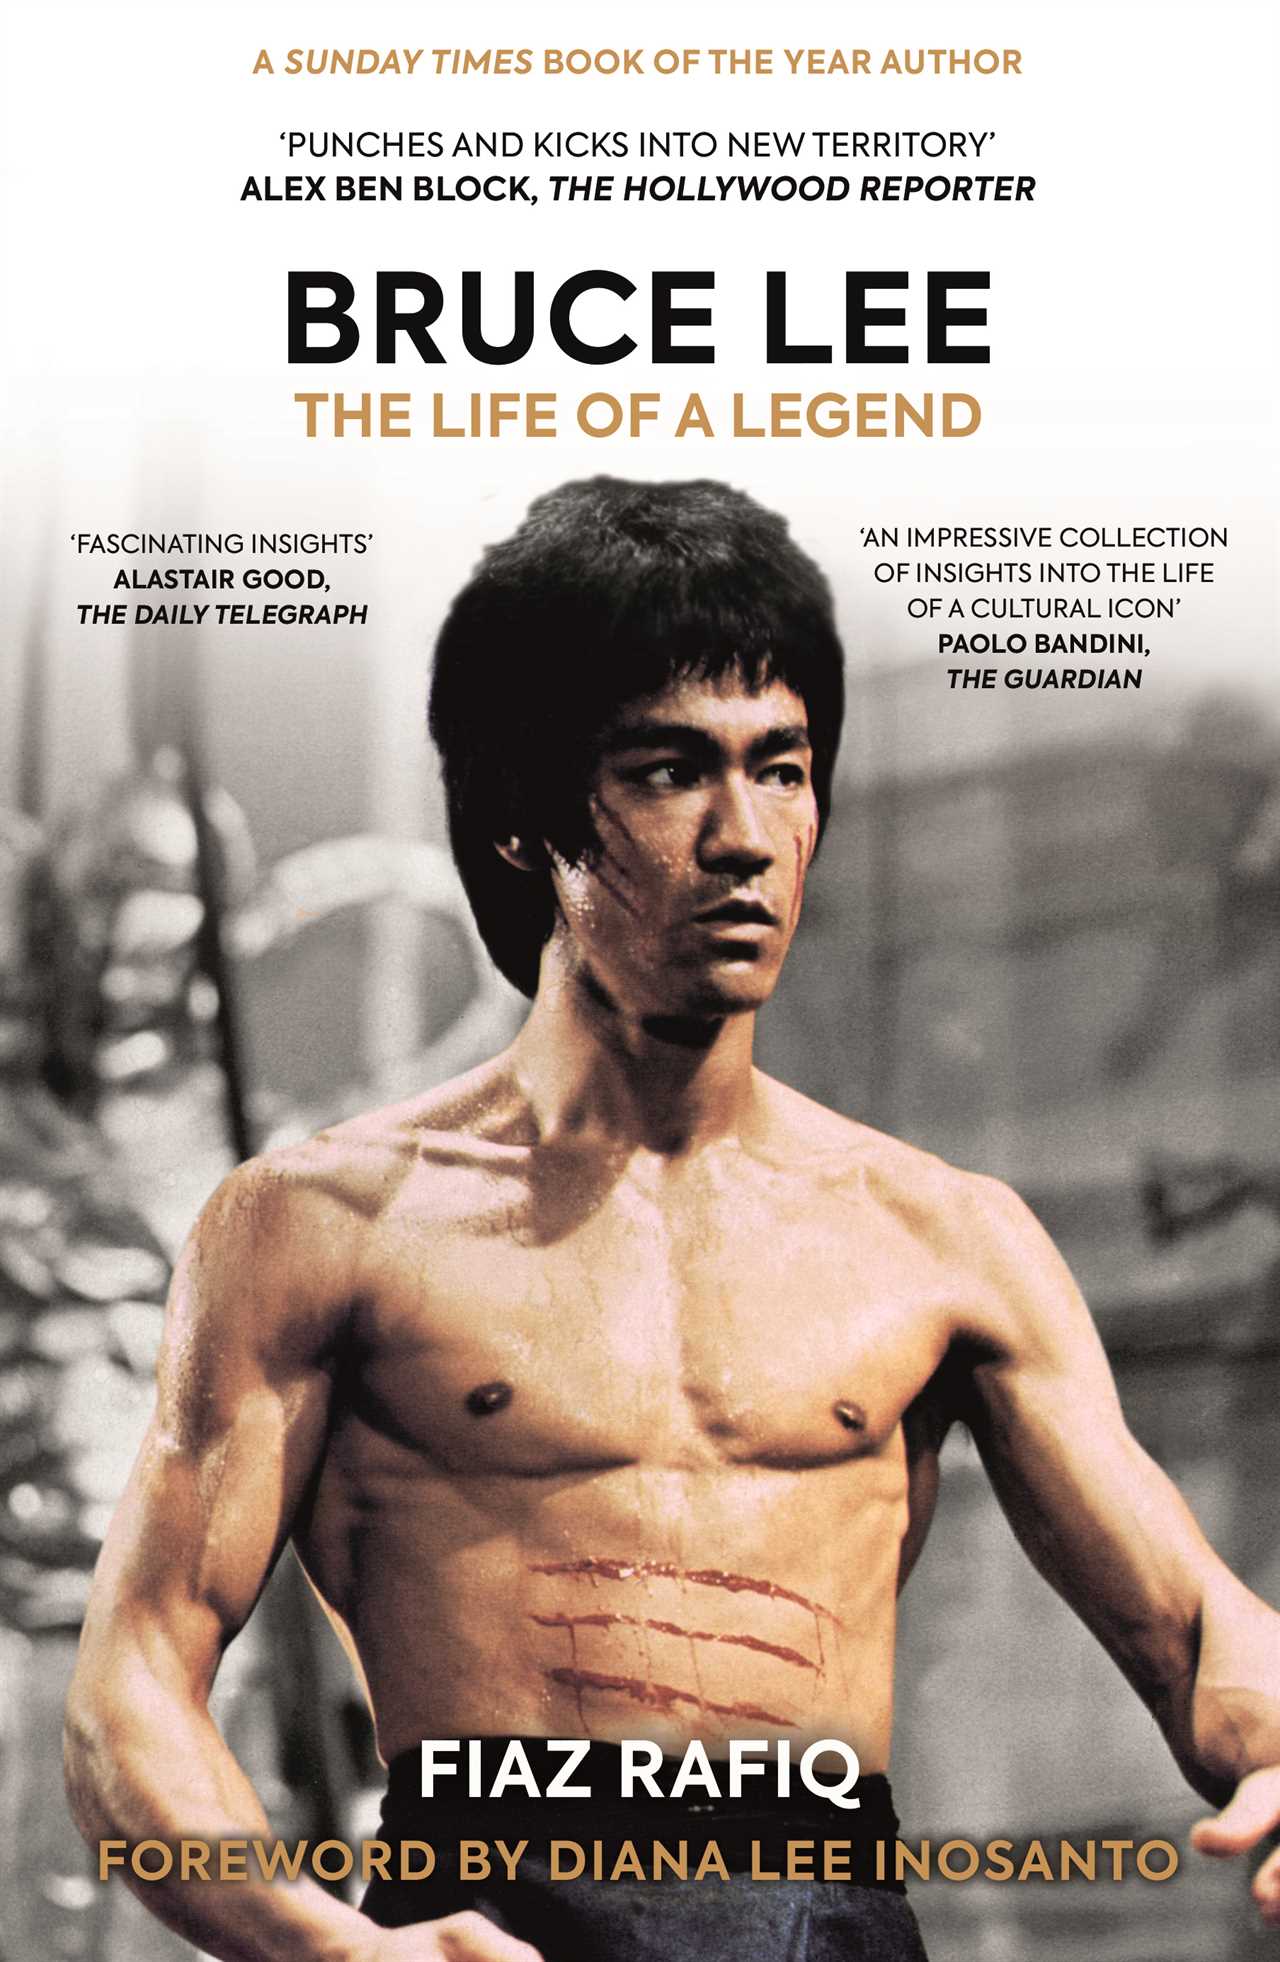 George Foreman believes Bruce Lee could have been a world champion boxer because he was so talented that he left him with chills.